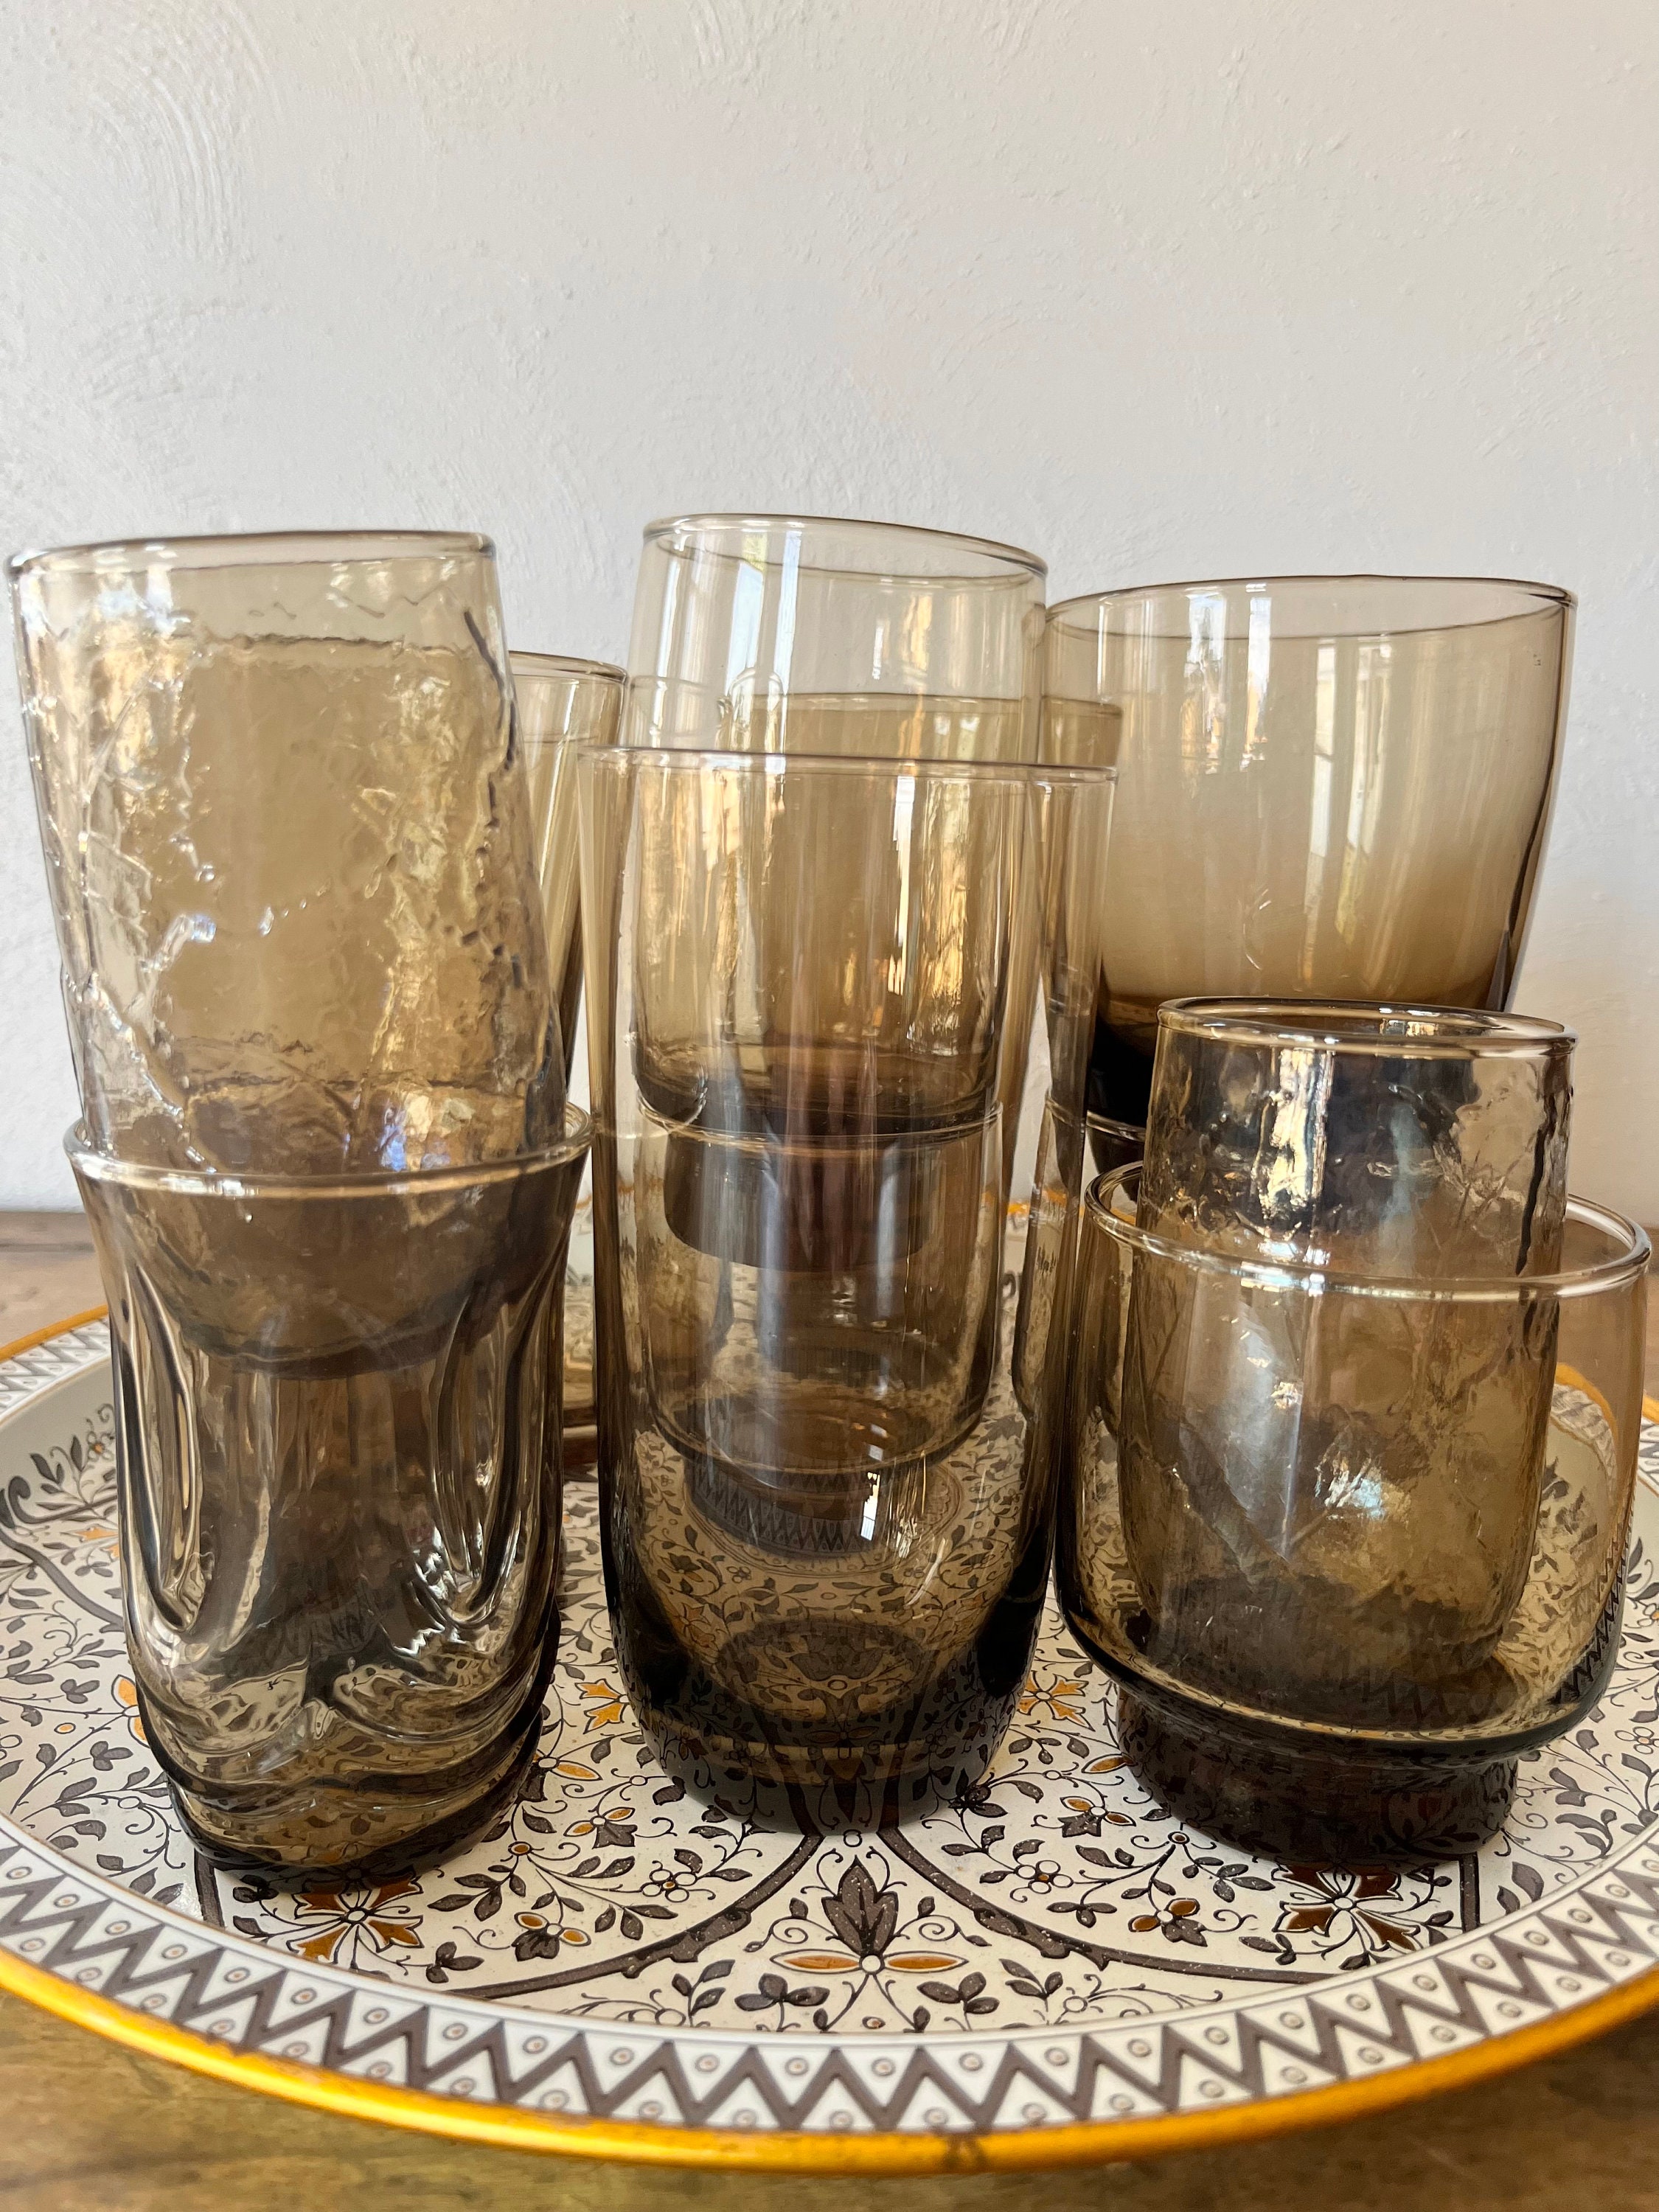 Unmatched Antique Drinking Glasses, Set of 8